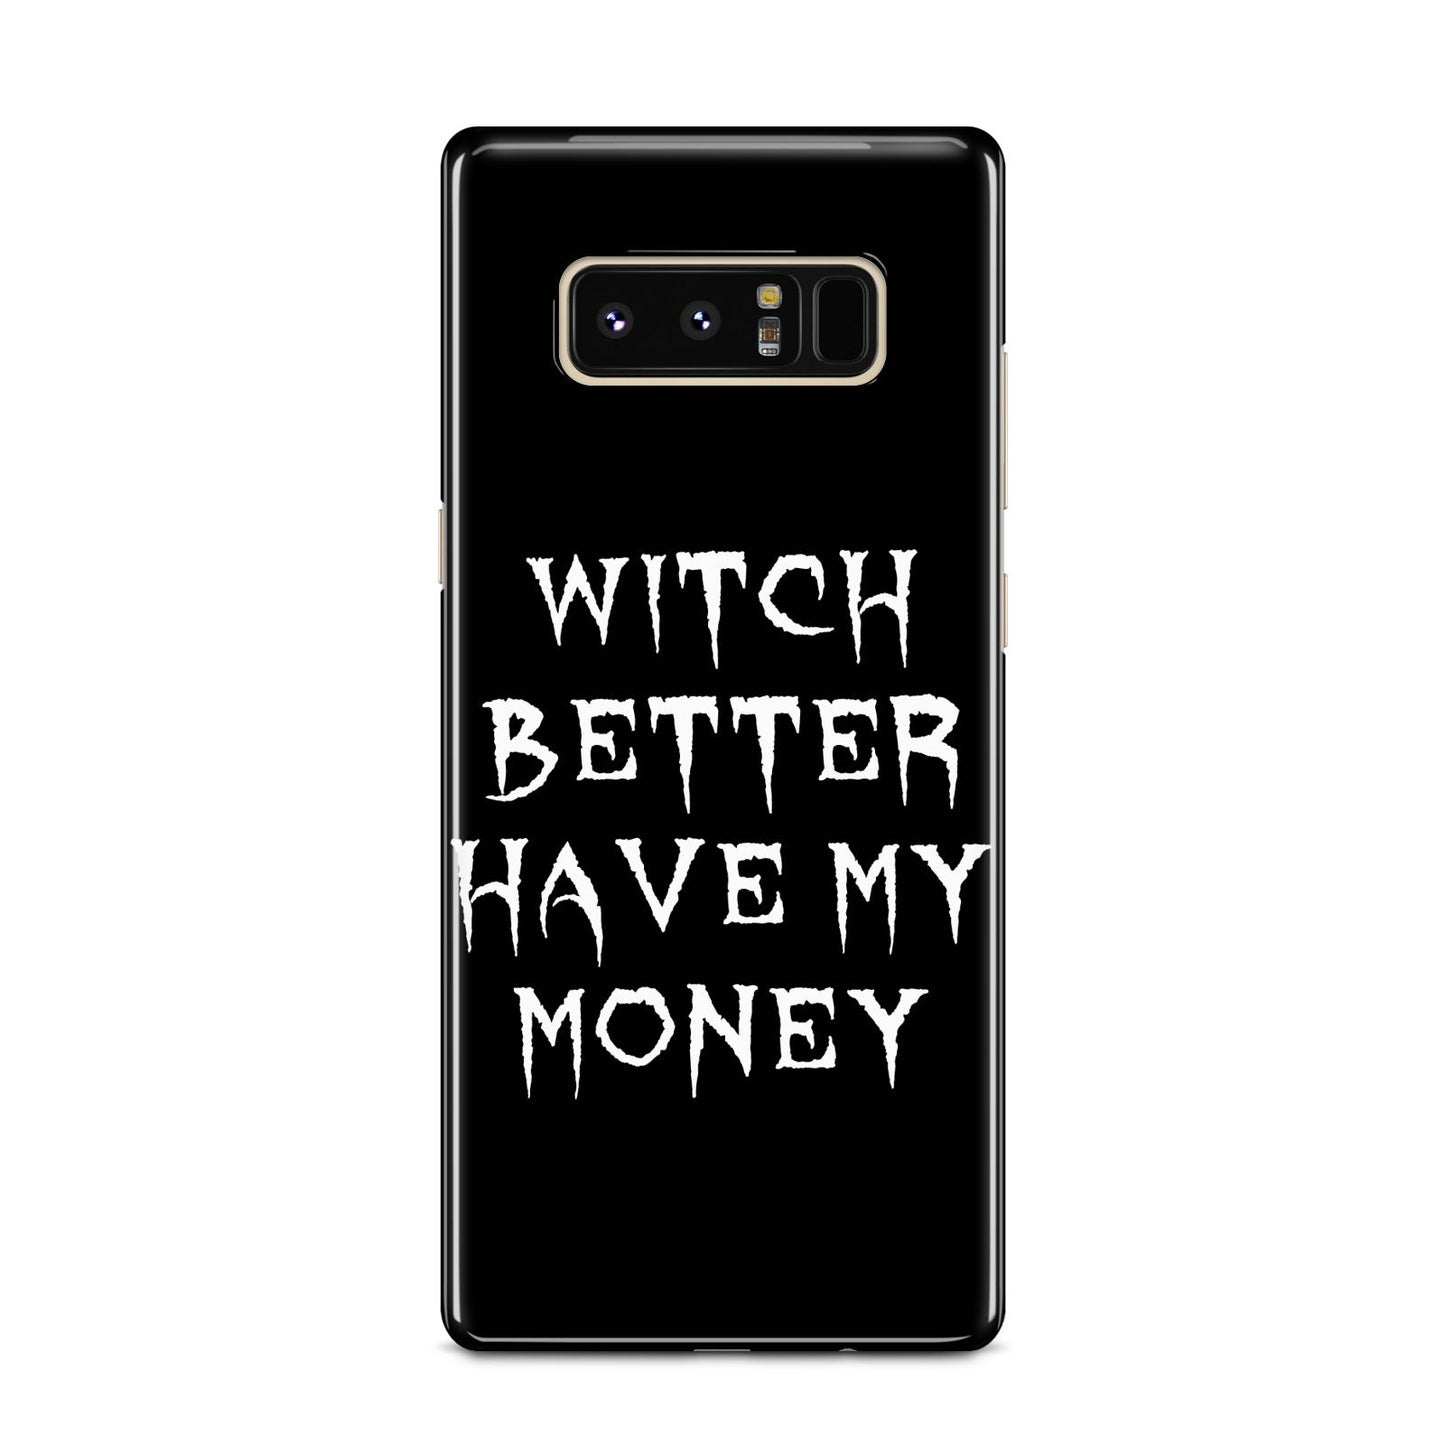 Witch Better Have My Money Samsung Galaxy Note 8 Case